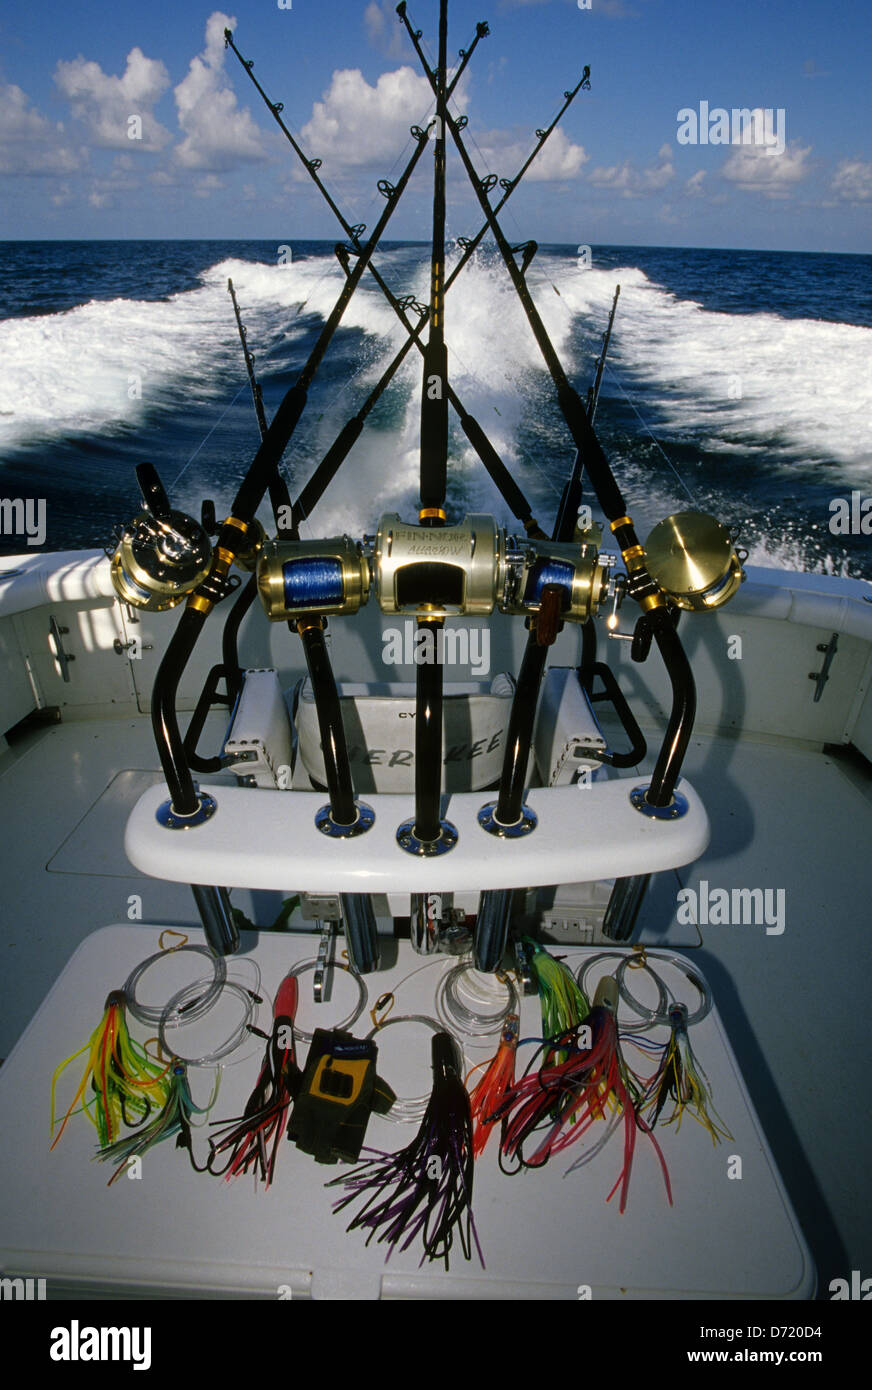 Trolling rods and reels used for offshore and deep sea fishing